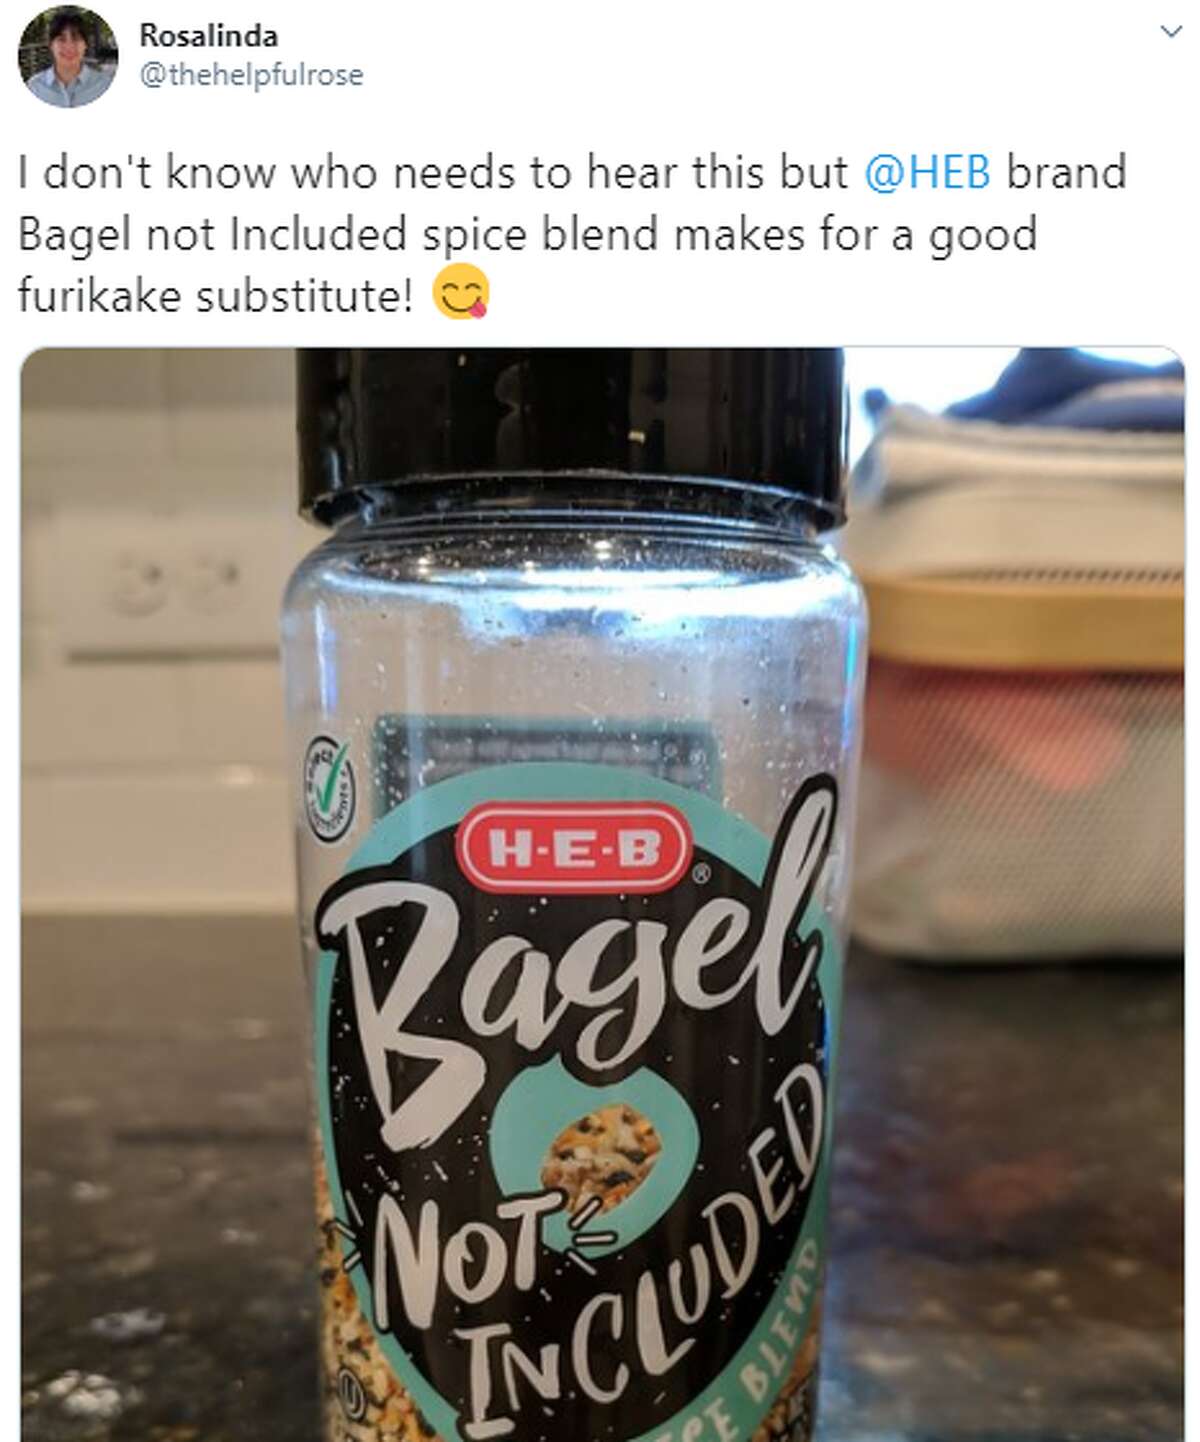 @thehelpfulrose: I don't know who needs to hear this but @HEB brand Bagel not Included spice blend makes for a good furikake substitute!